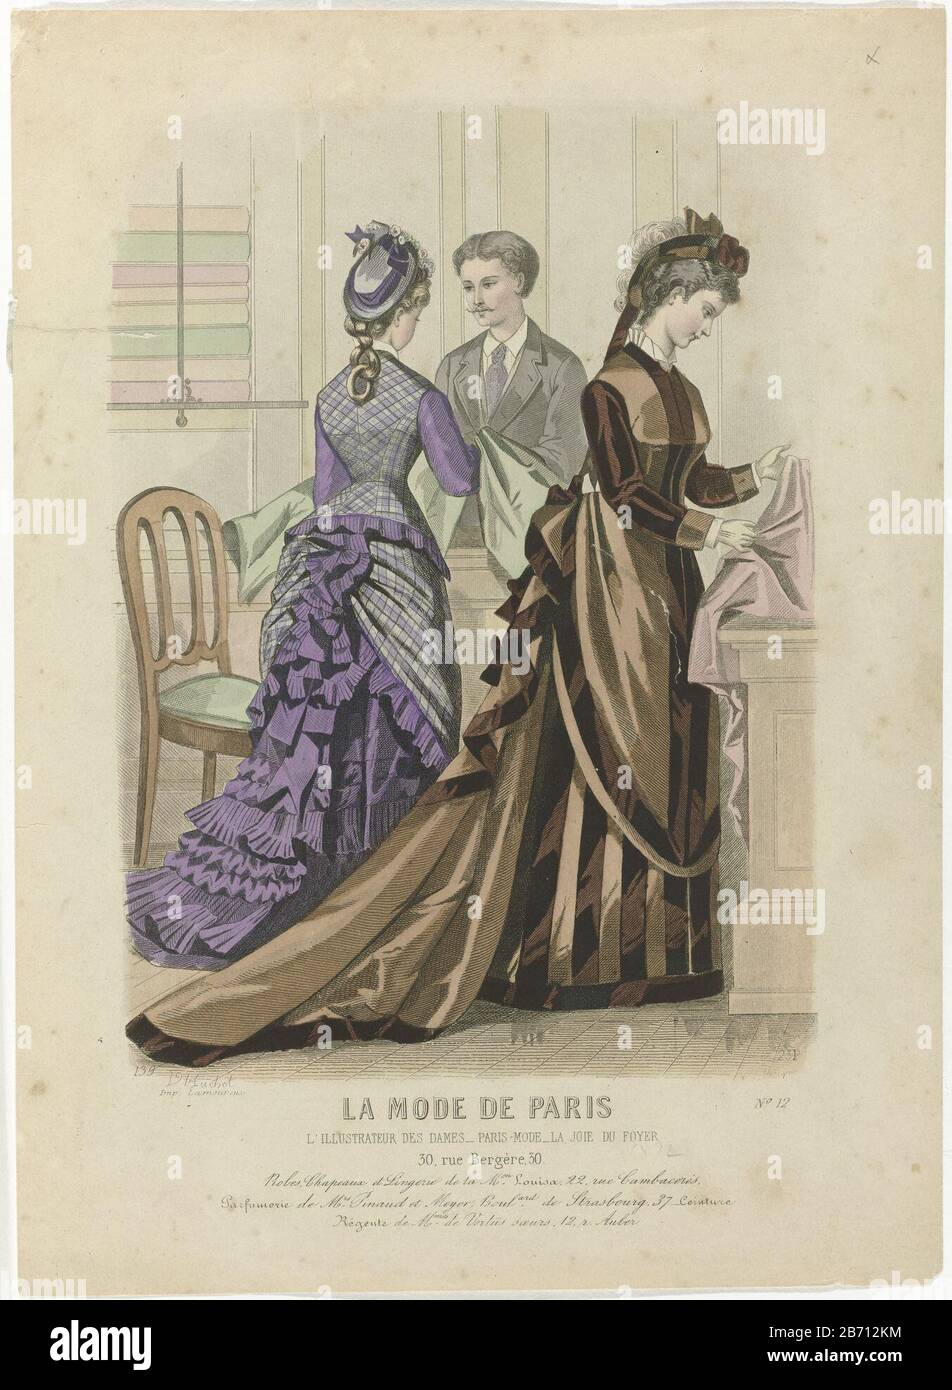 La Mode de Paris, 1874, No231, No 12 Robes Chapeaux et Lingeri Two women  look fabrics in a store. They are dressed in gowns with eased. The dresses  and hats are the